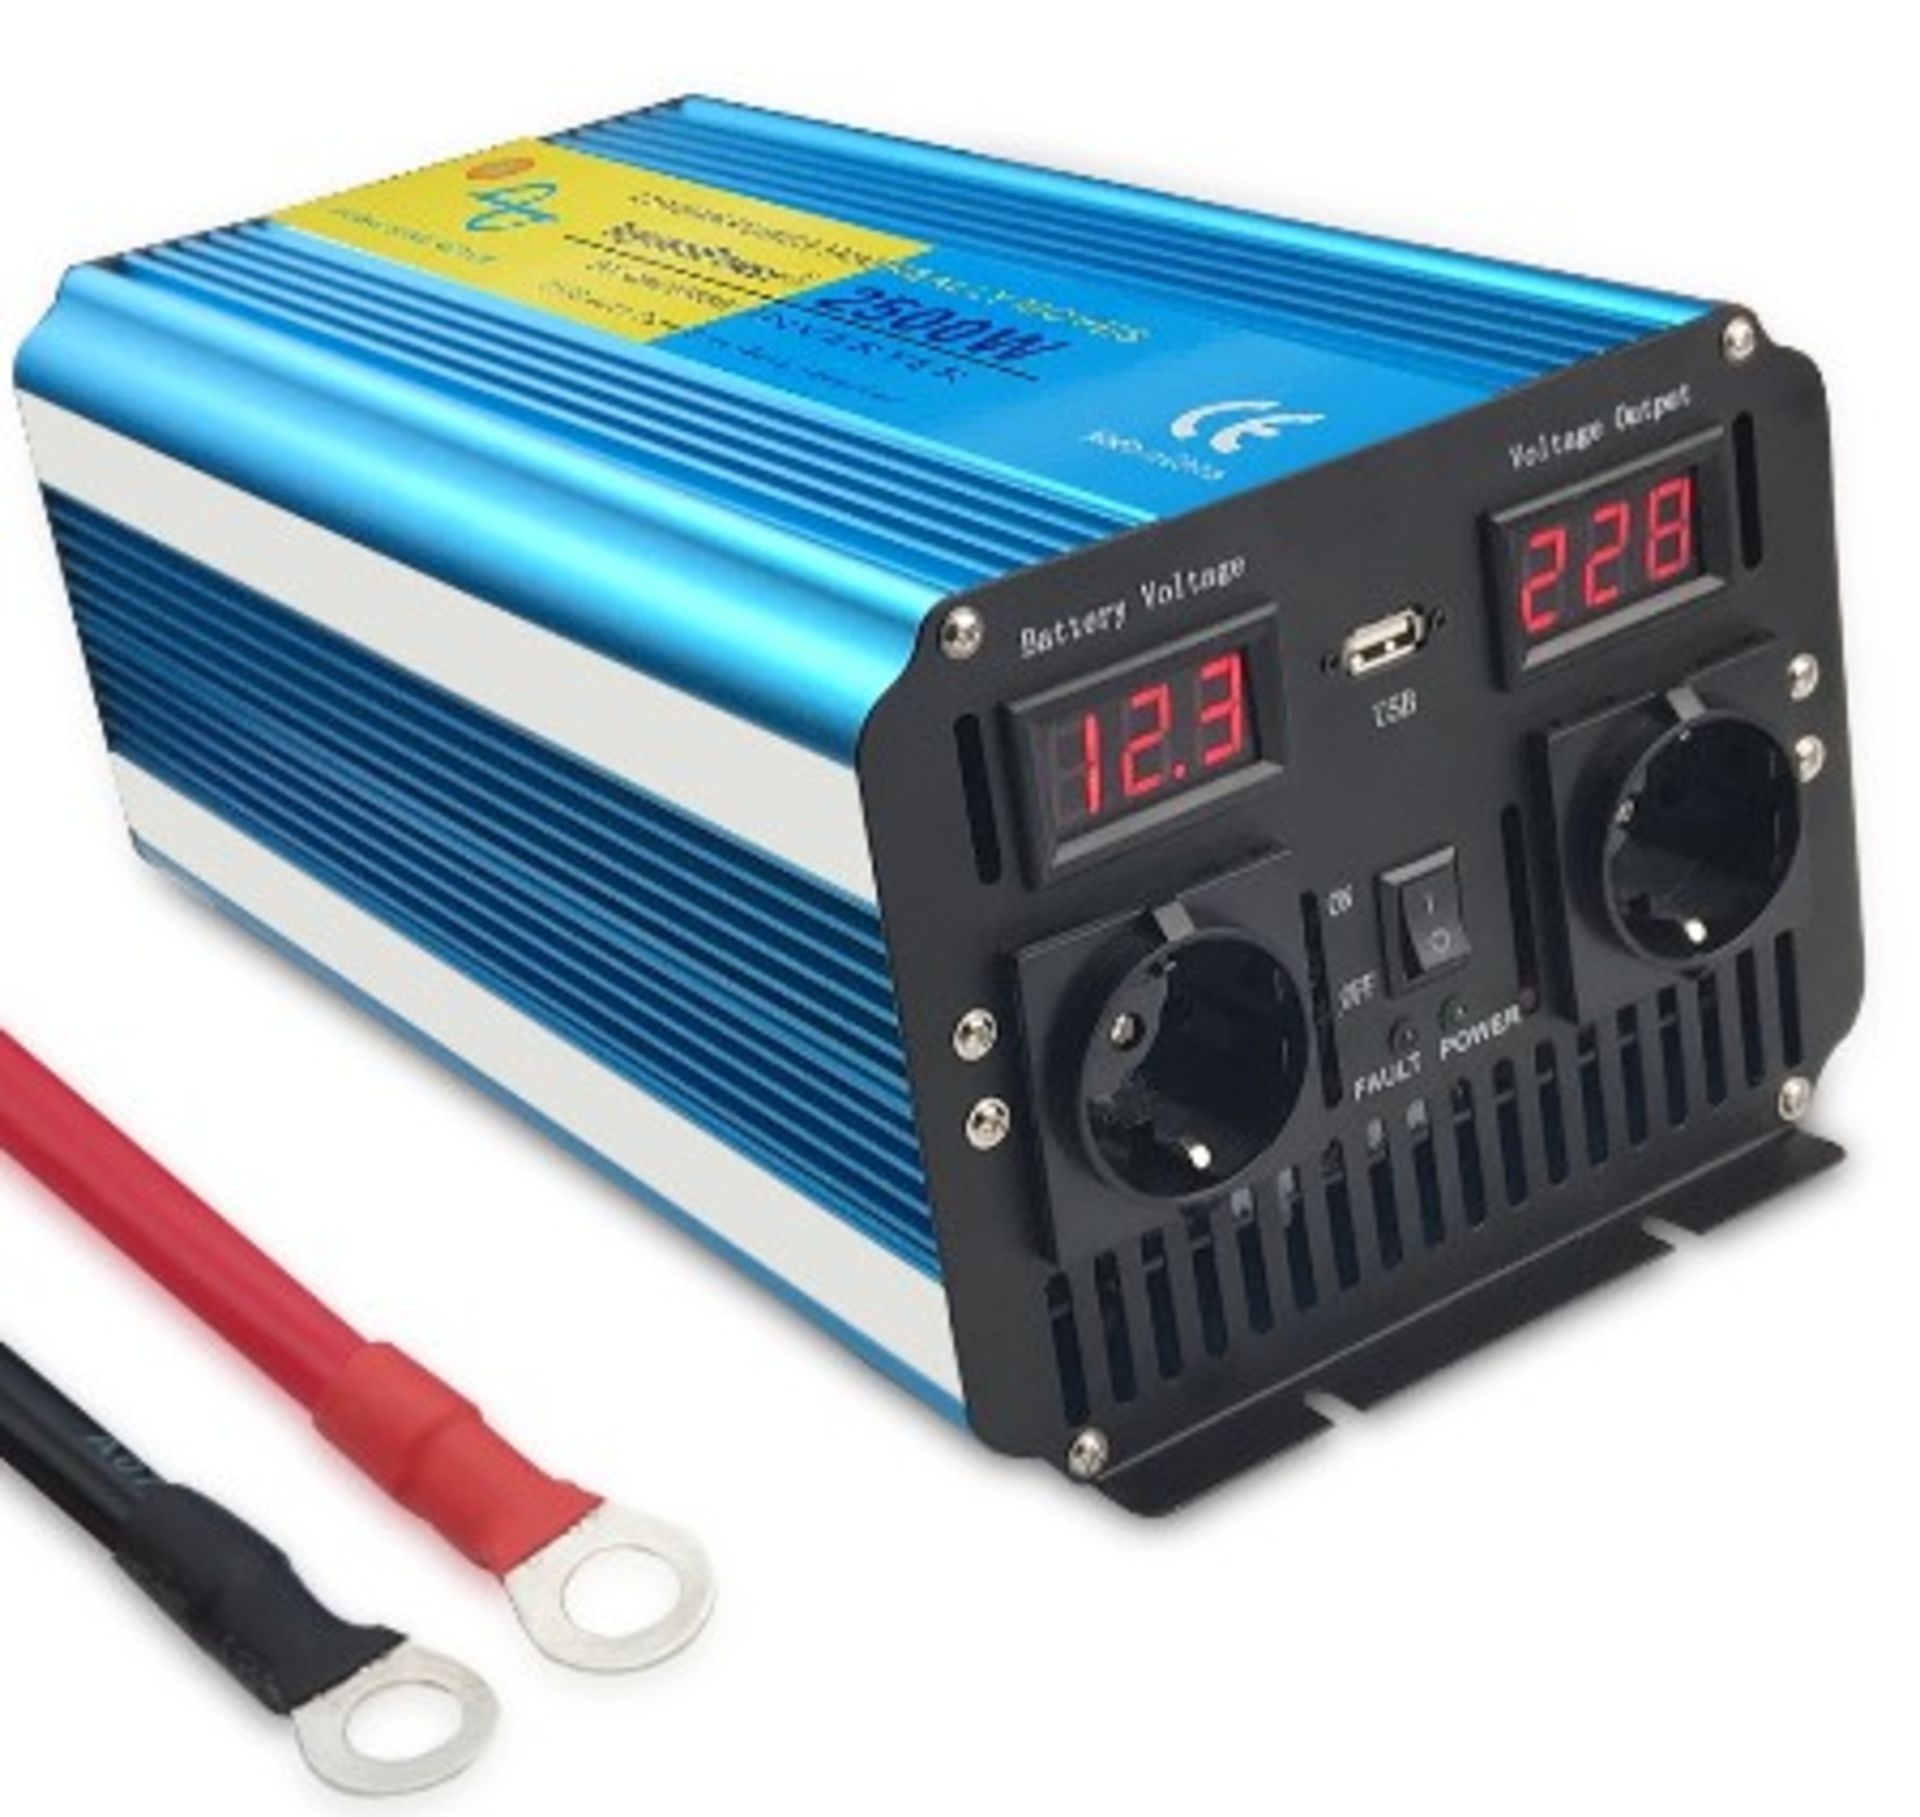 A boxed as new Luyuanipower DX-GAC2500W Power Inverter. 12V DC to 230V AC convertor with LCD